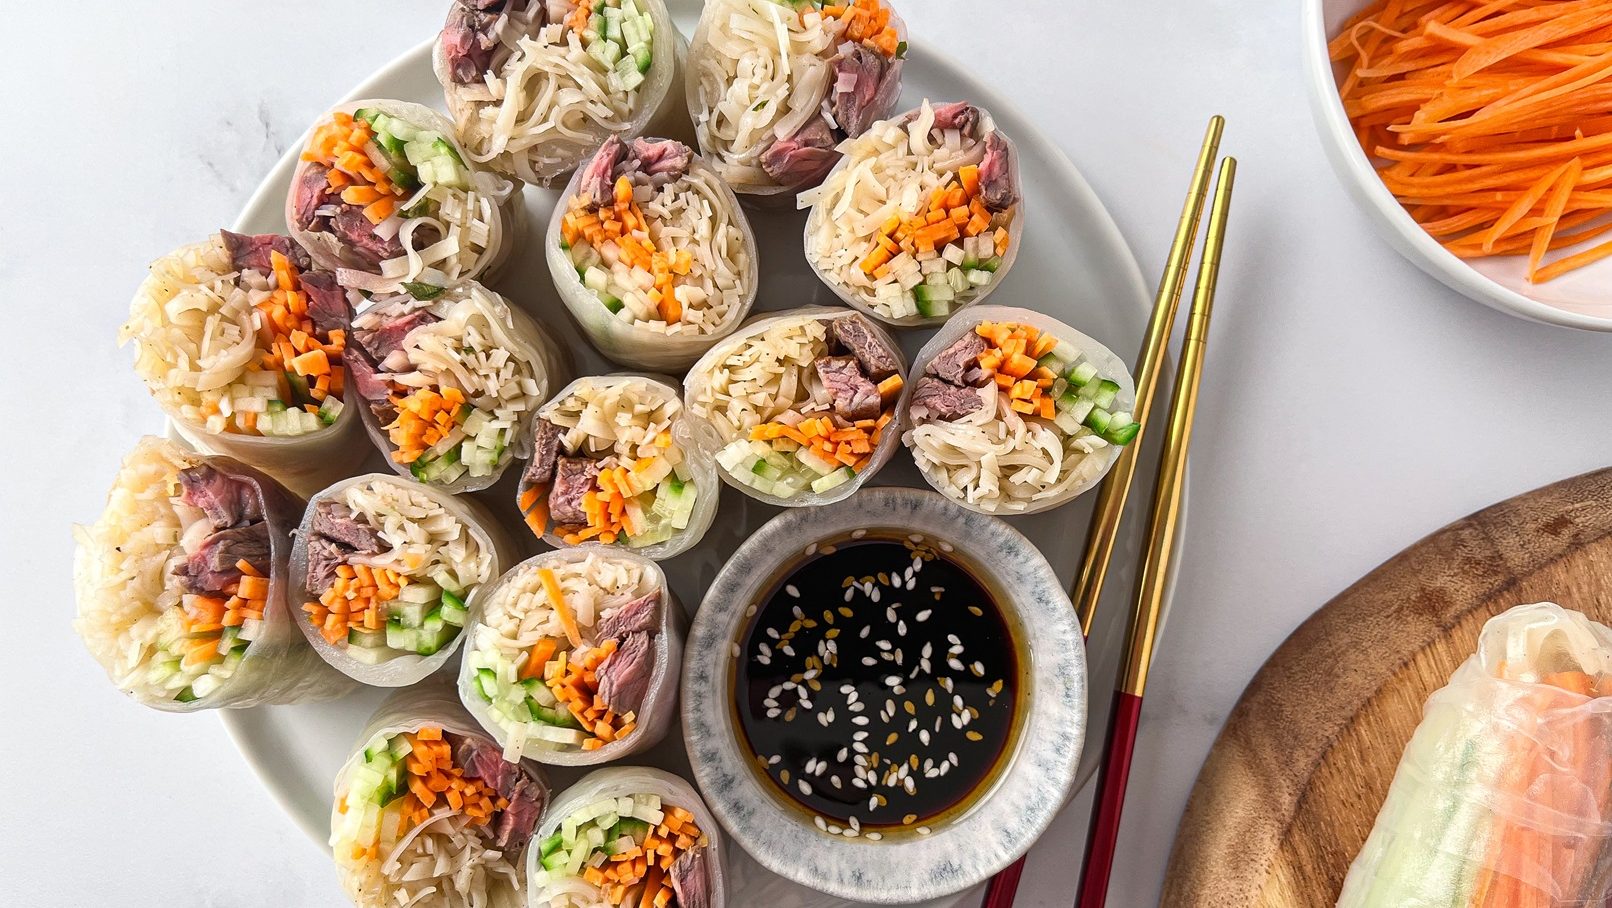 Several rice paper rolls cut side up showing colourful ingredients on a plate with a small bowl of dipping sauce and chopsticks.